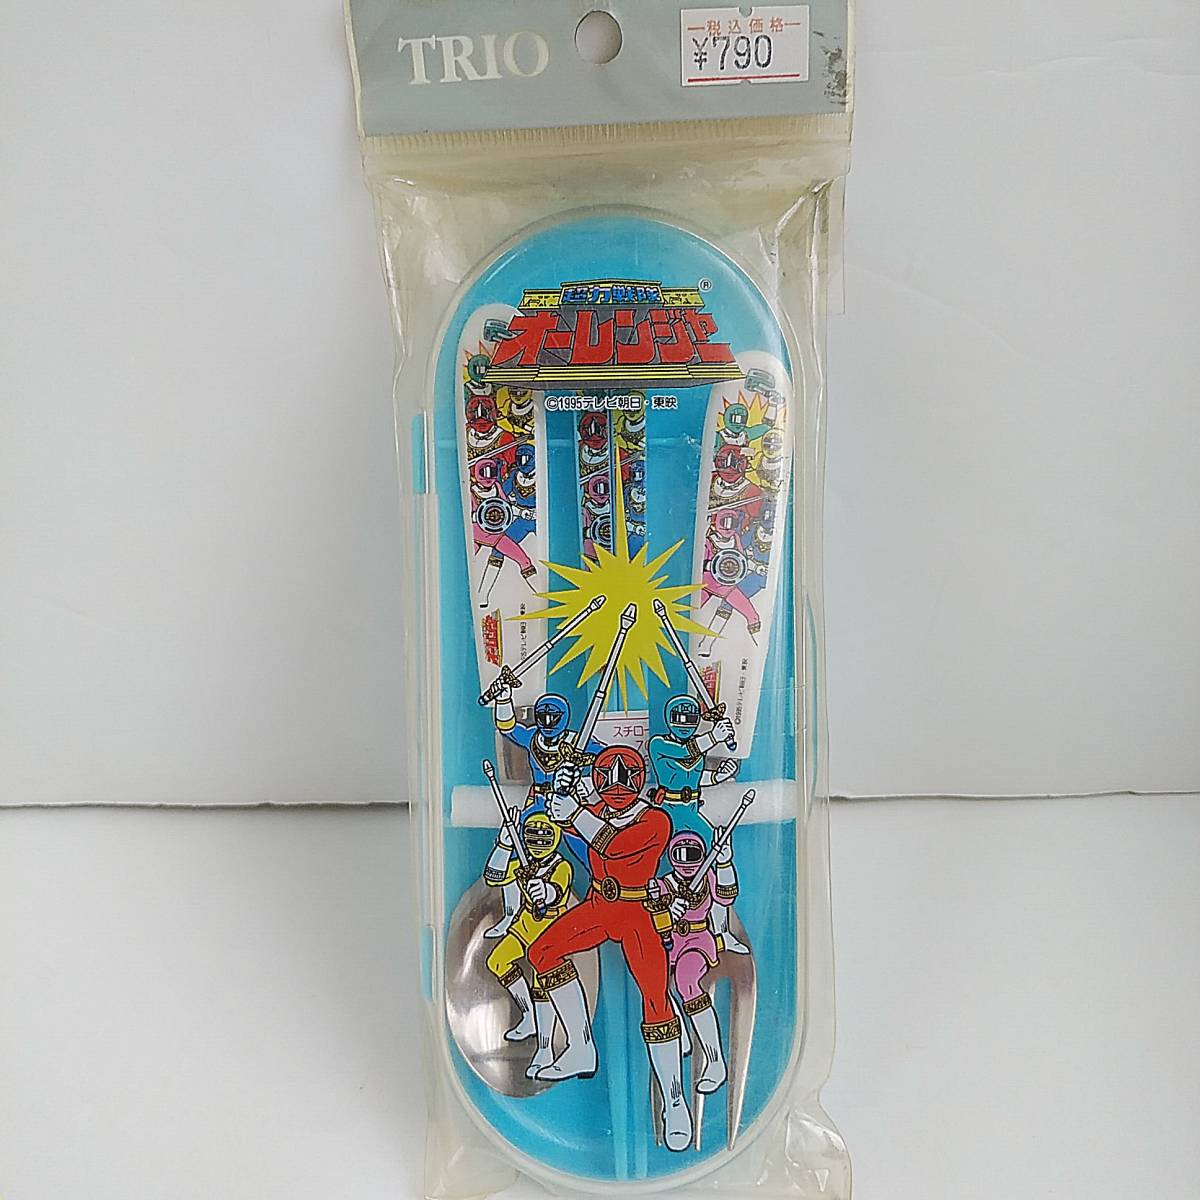  dead stock * Showa Retro * that time thing 95 year [ Chouriki Sentai Ohranger ] special effects super Squadron set of forks, spoons, chopsticks chopsticks fork Pooh n190826-08